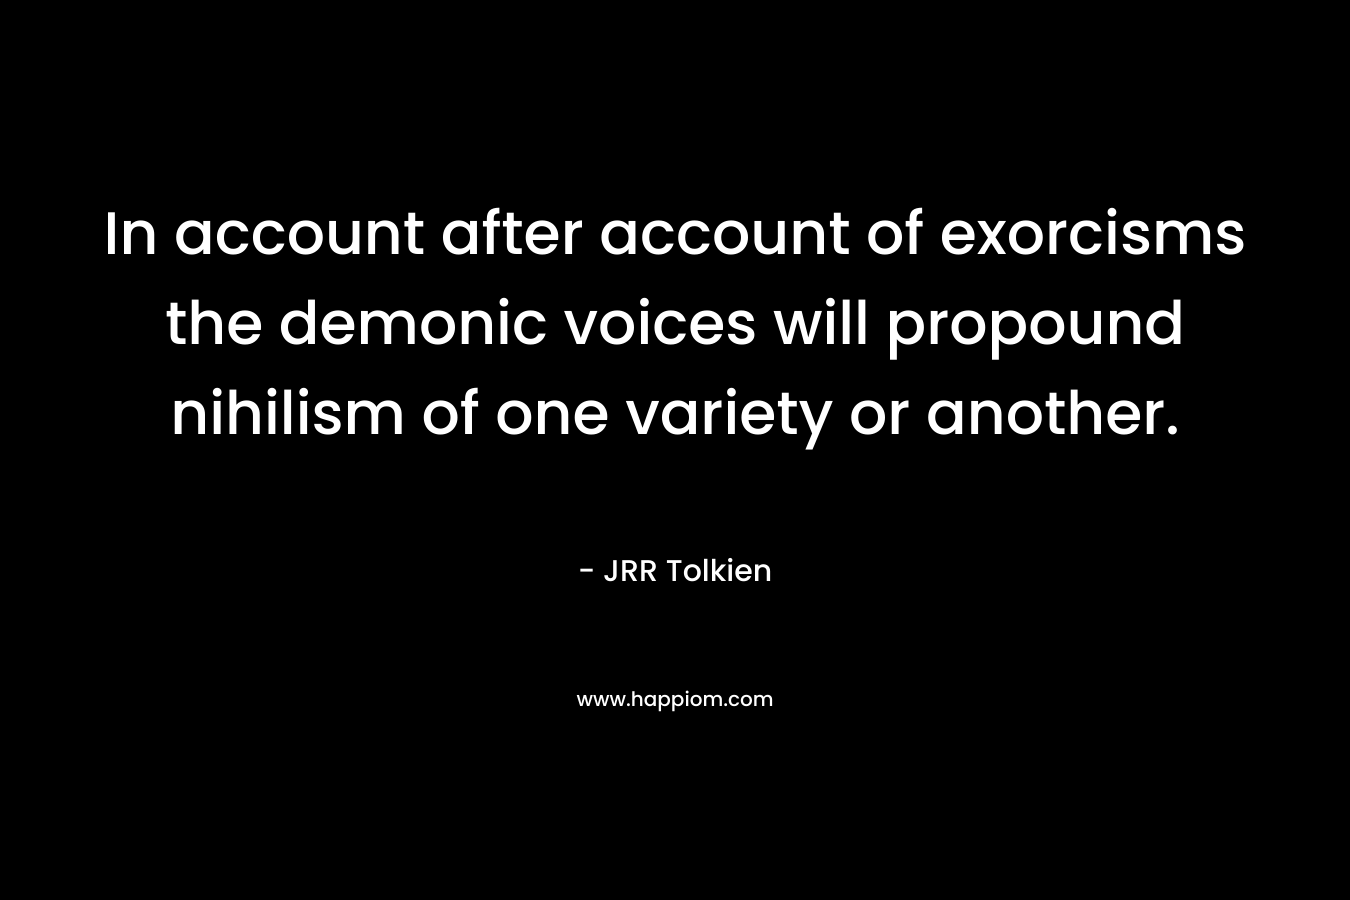 In account after account of exorcisms the demonic voices will propound nihilism of one variety or another. – JRR Tolkien